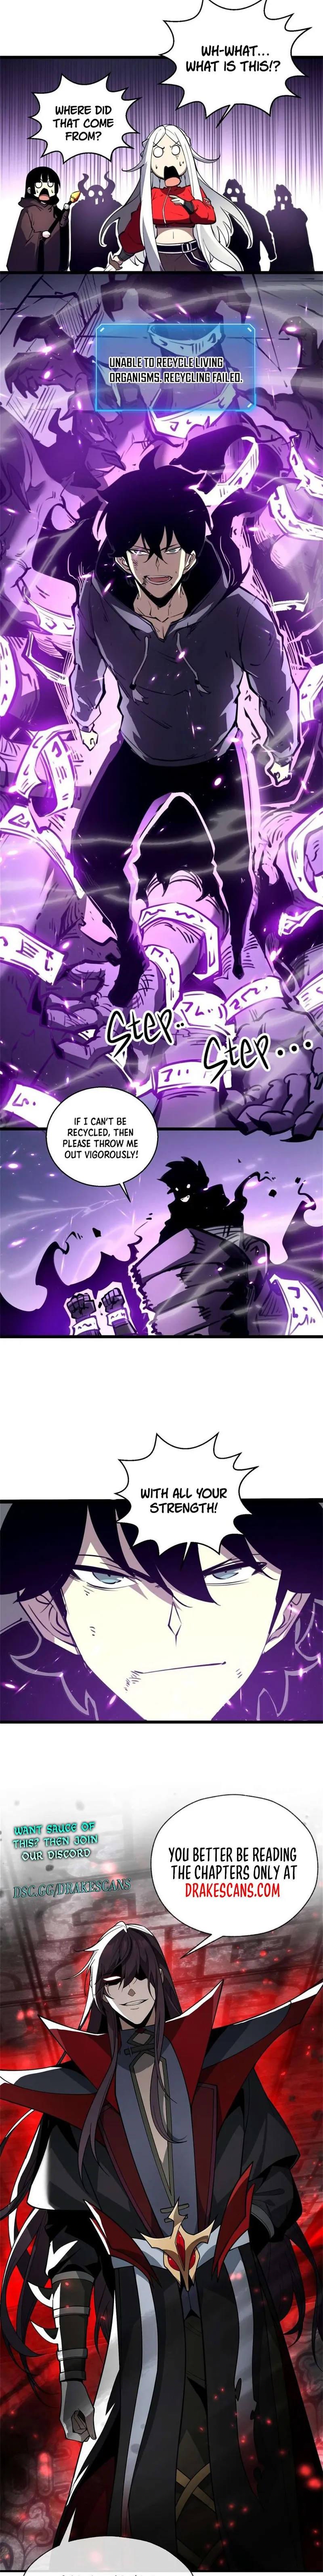 I Became The King by Scavenging Chapter 9 page 16